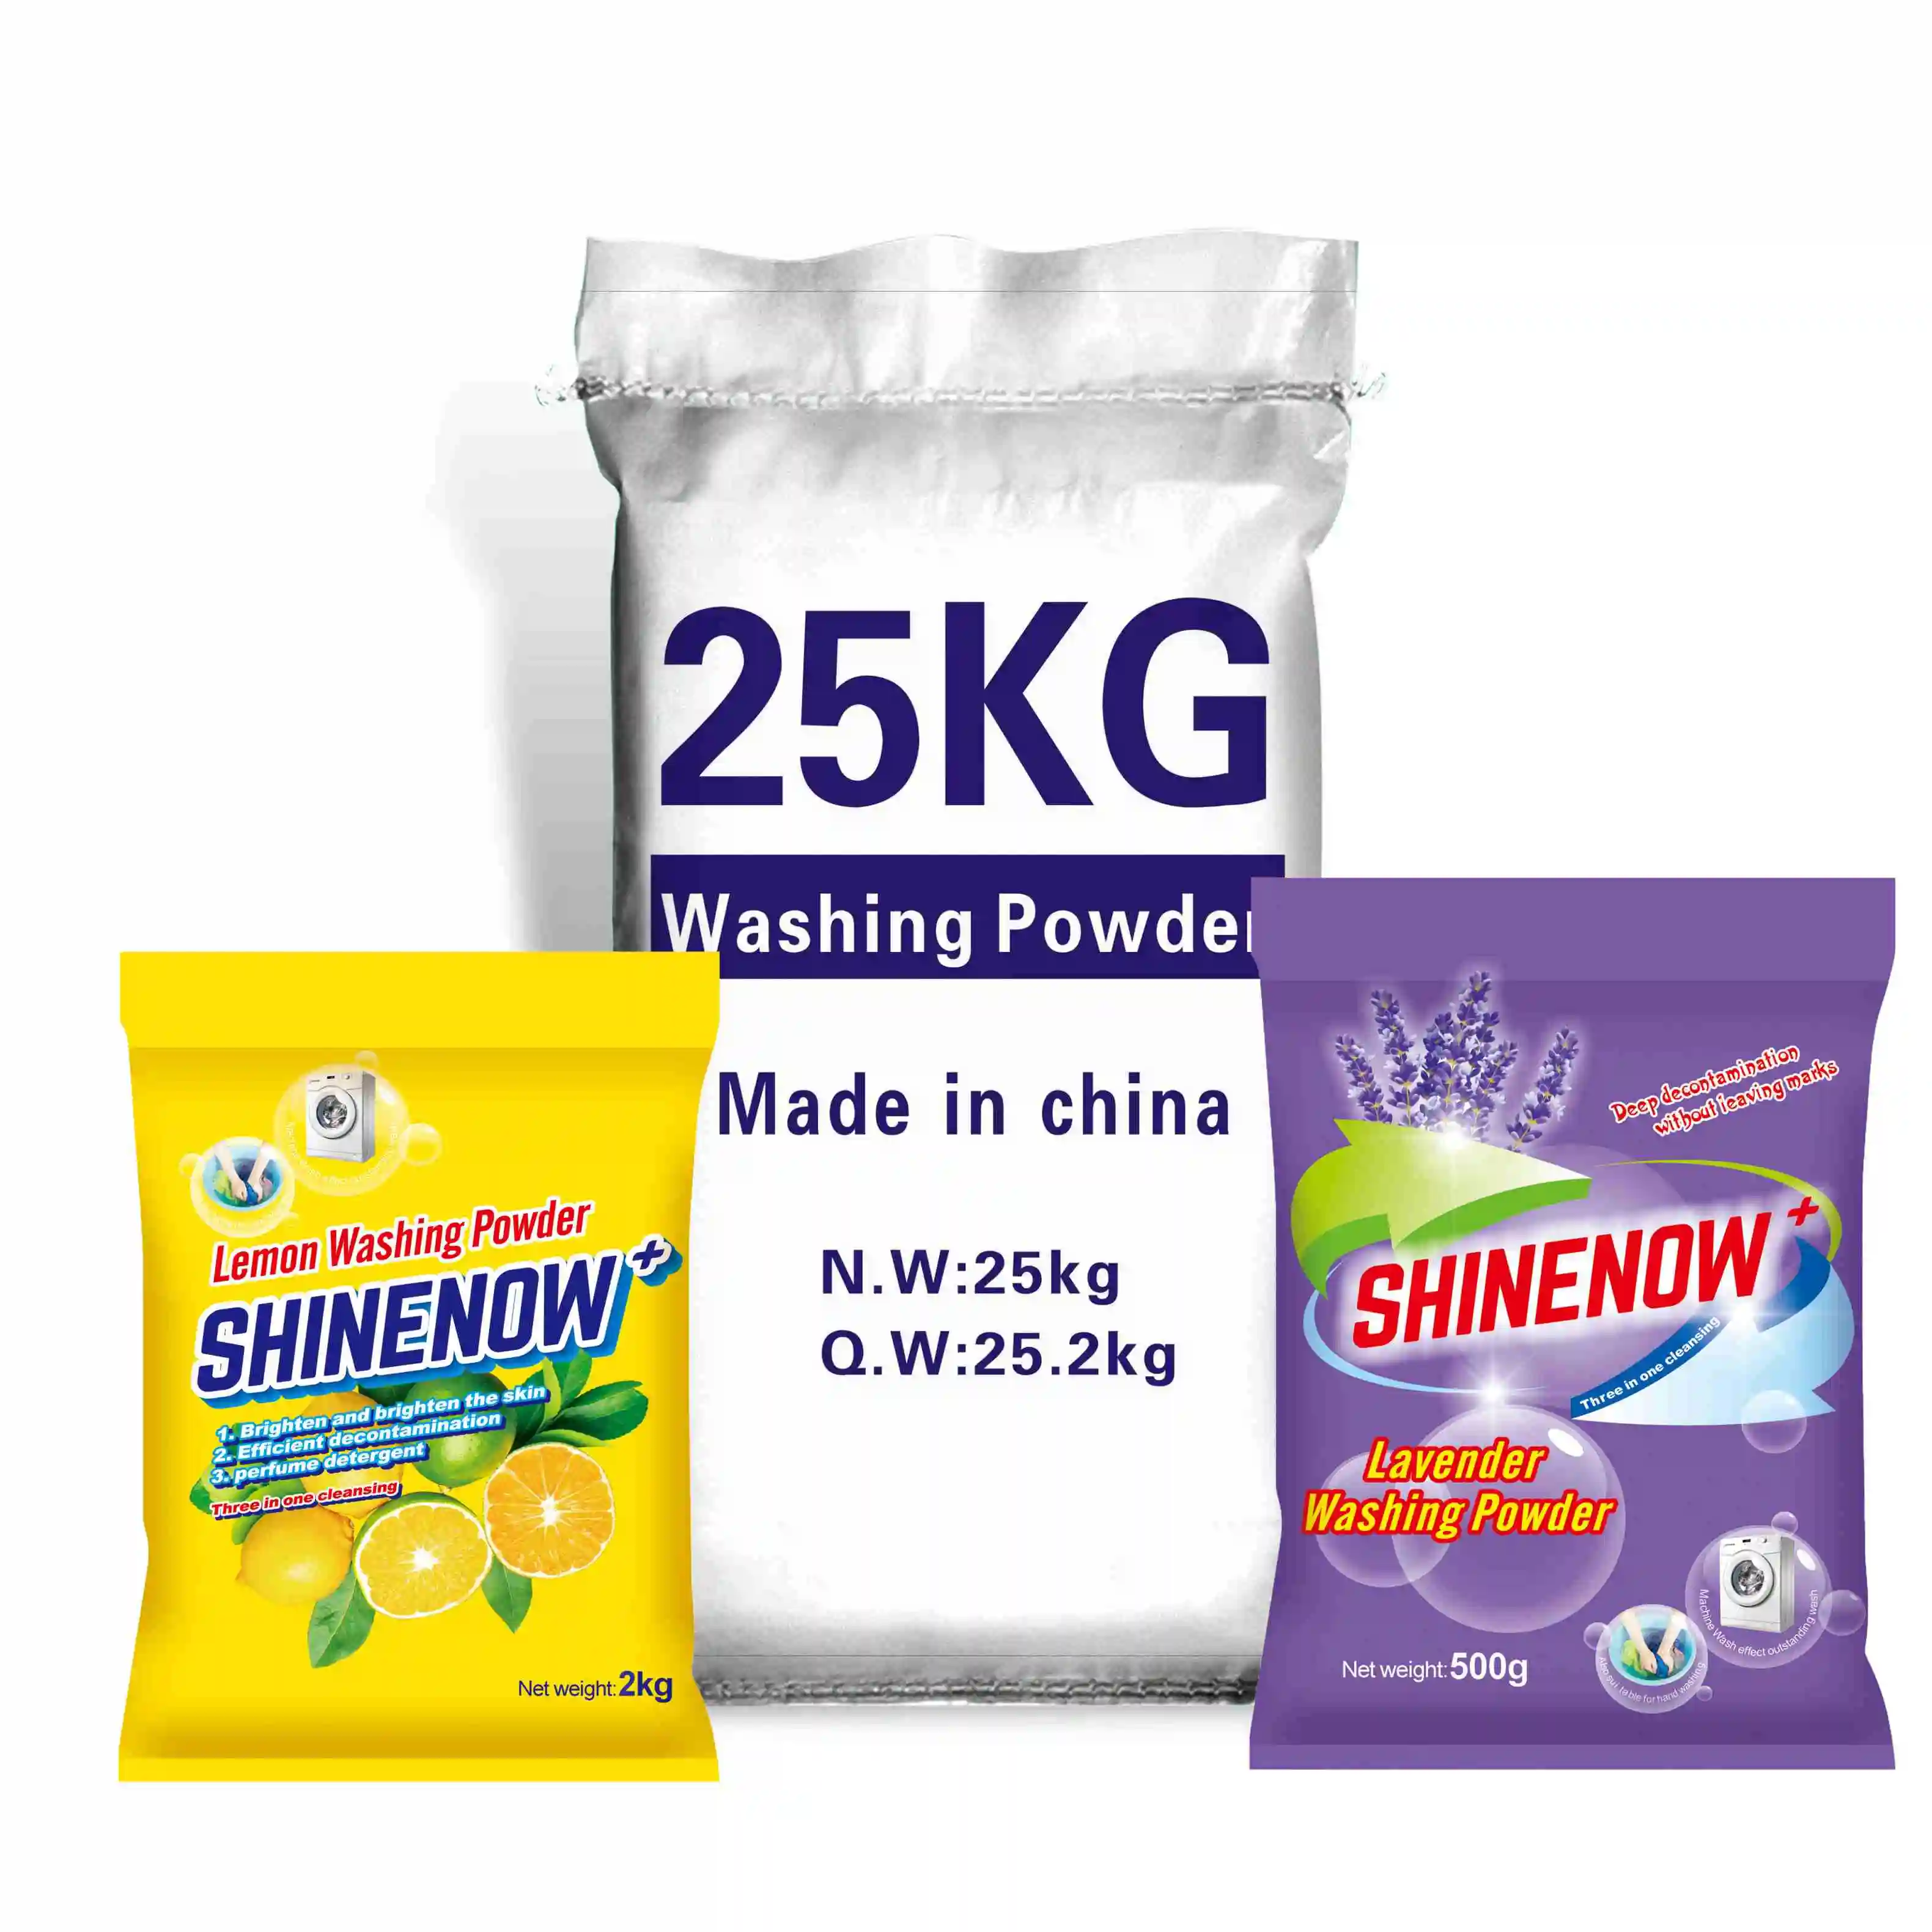 25 KG woven bag big size washing powder bulk packing powder Safe High Foam Aroma Floral Attack Ultra Power Laundry Detergent